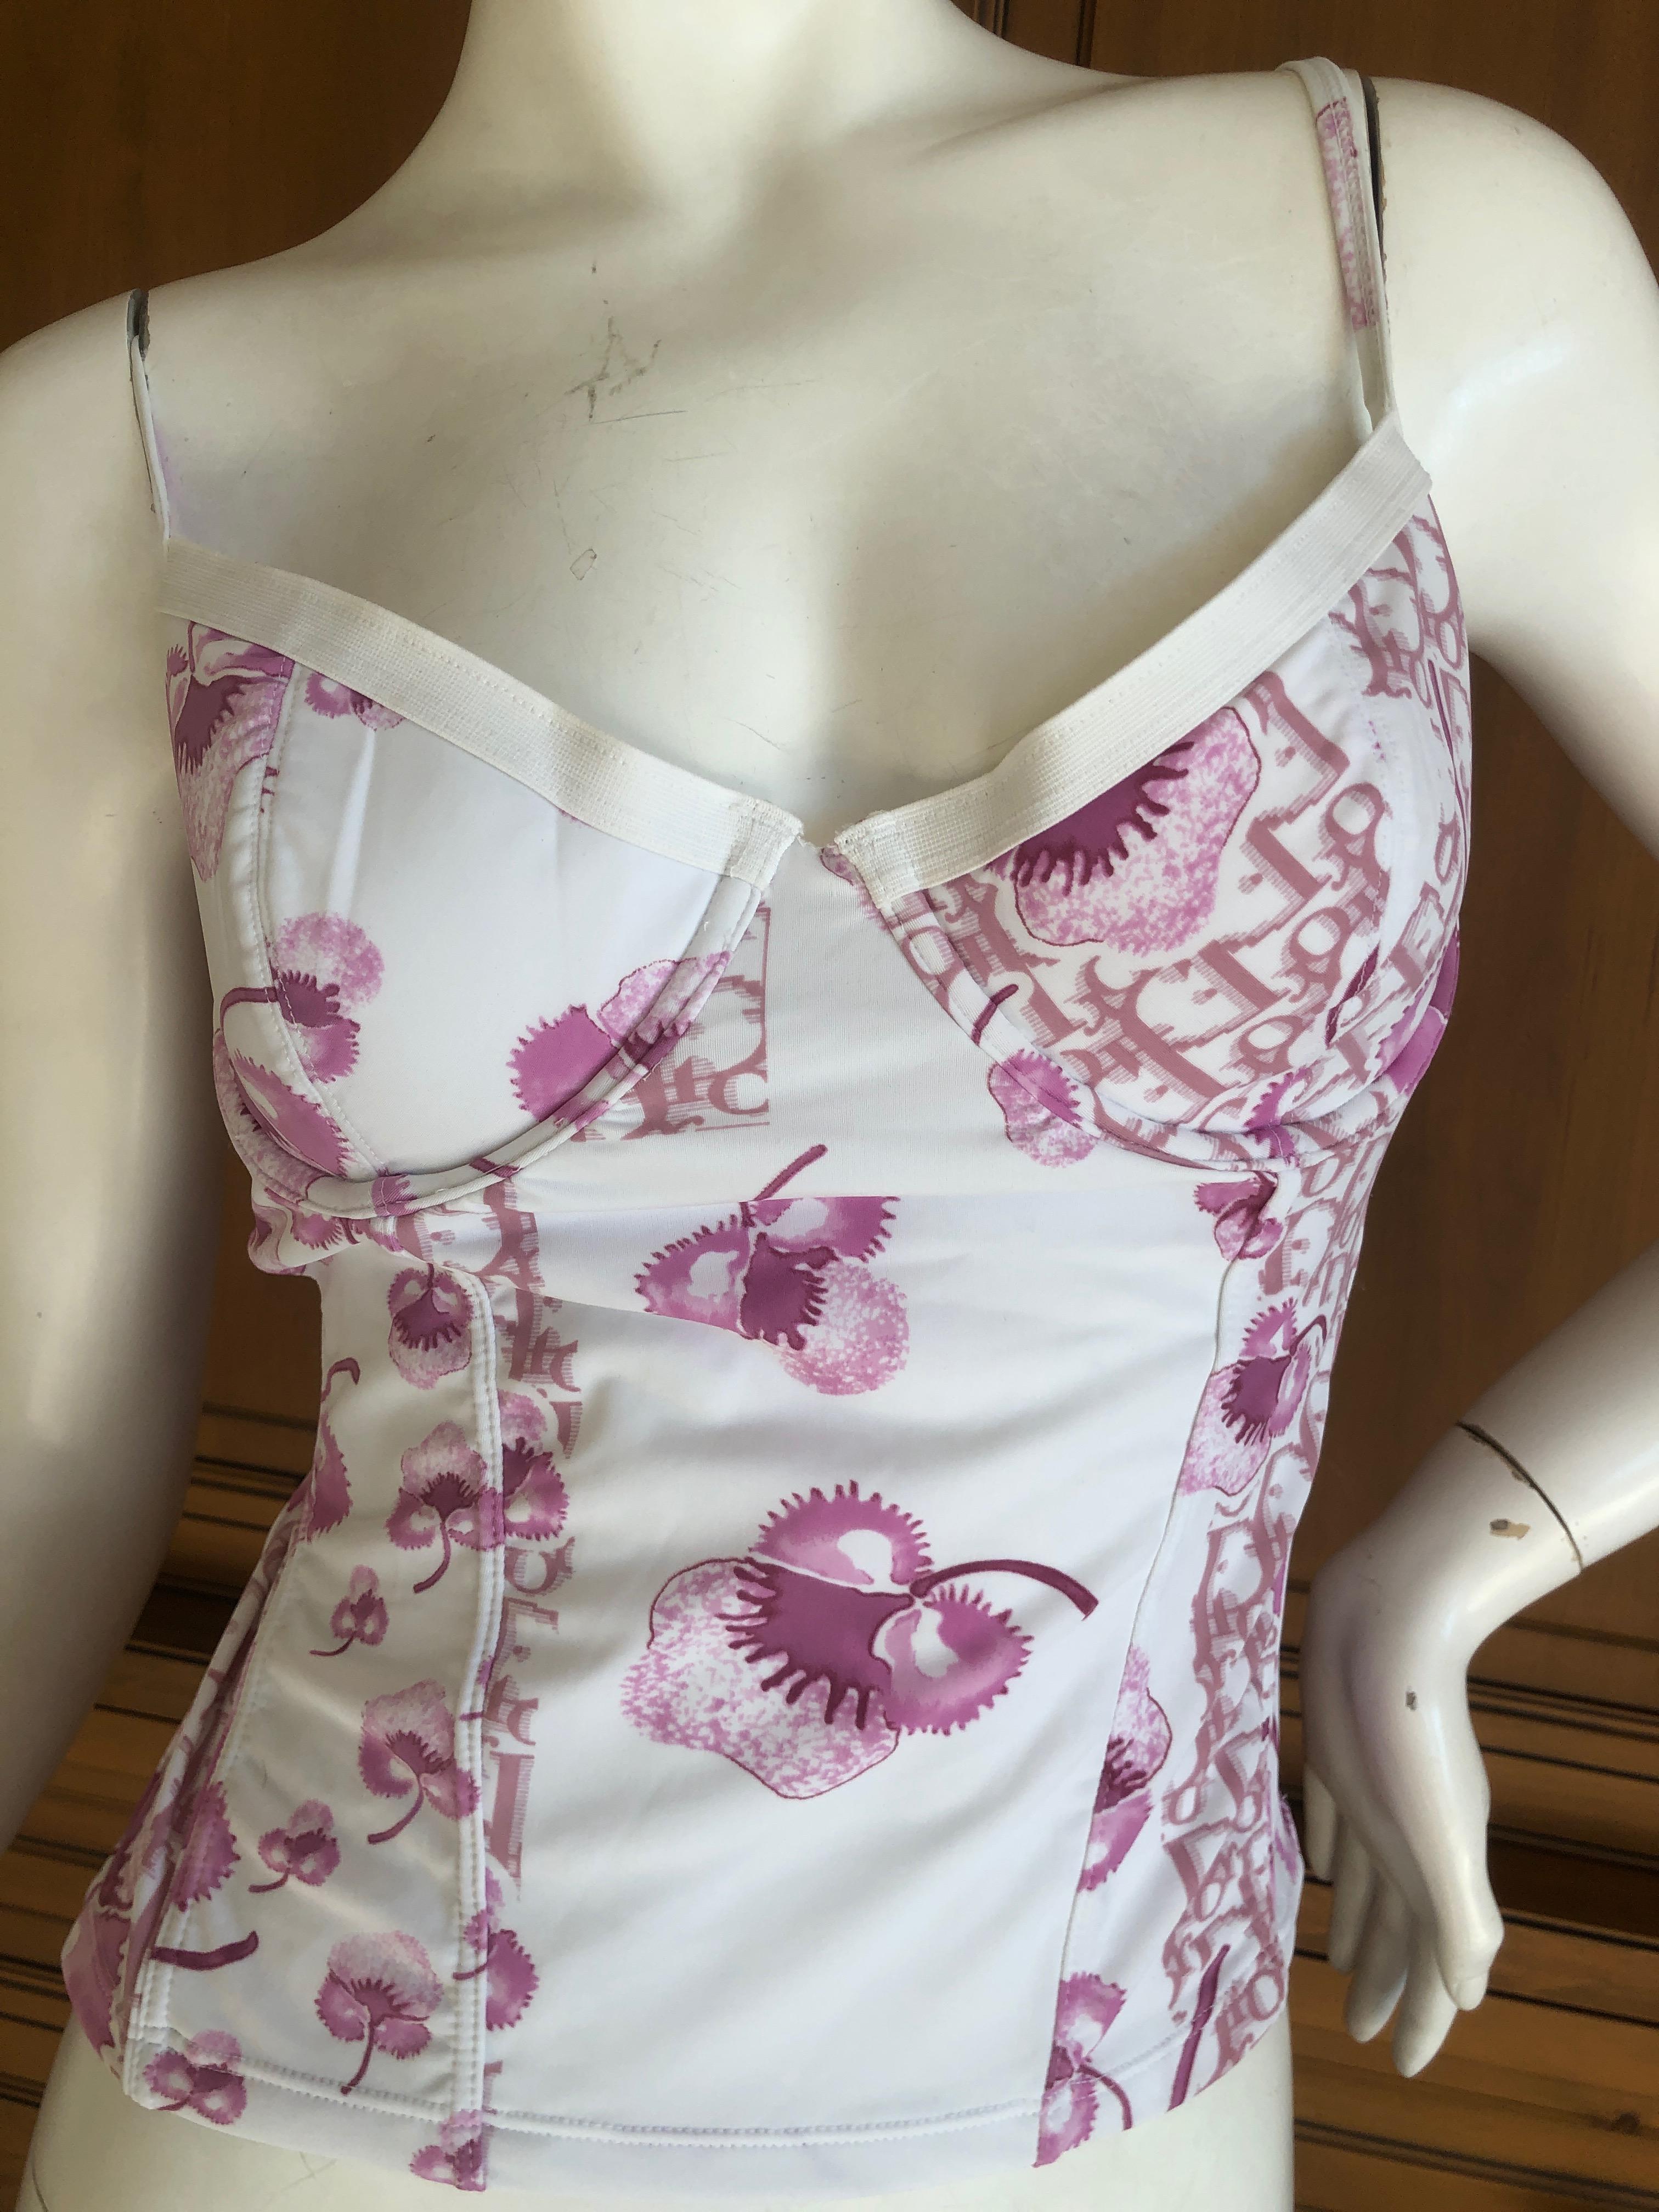 Wonderful vintage corset from Christian Dior 
Cotton 
Marked 42
Bust 36